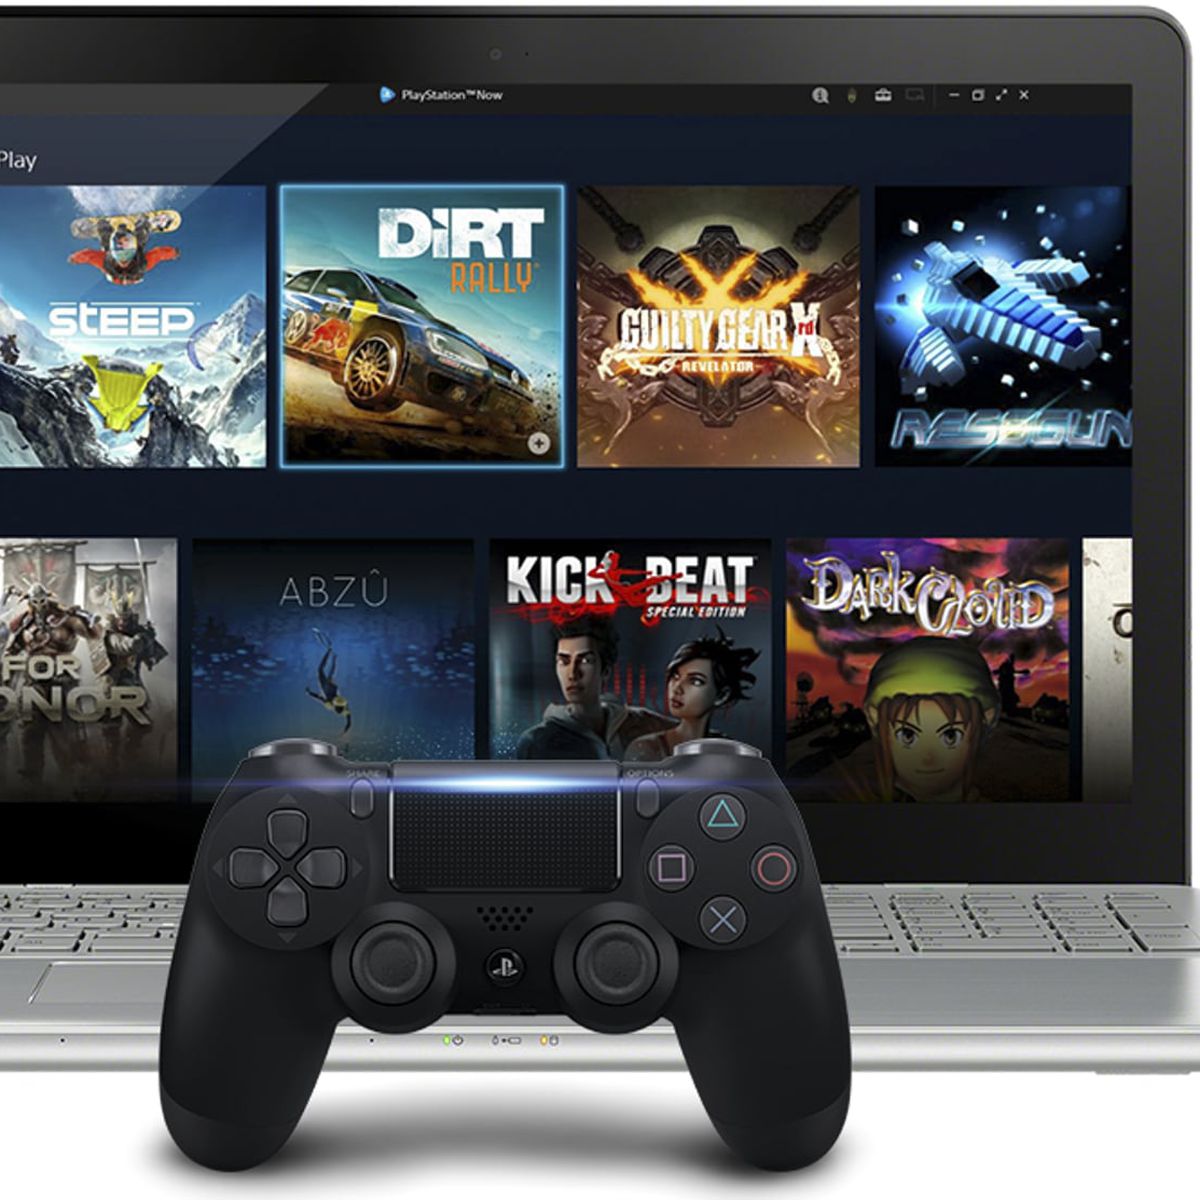 Apple Document Suggests Sony Considered Bringing PS Now Gaming Service to  Mobile Devices - MacRumors